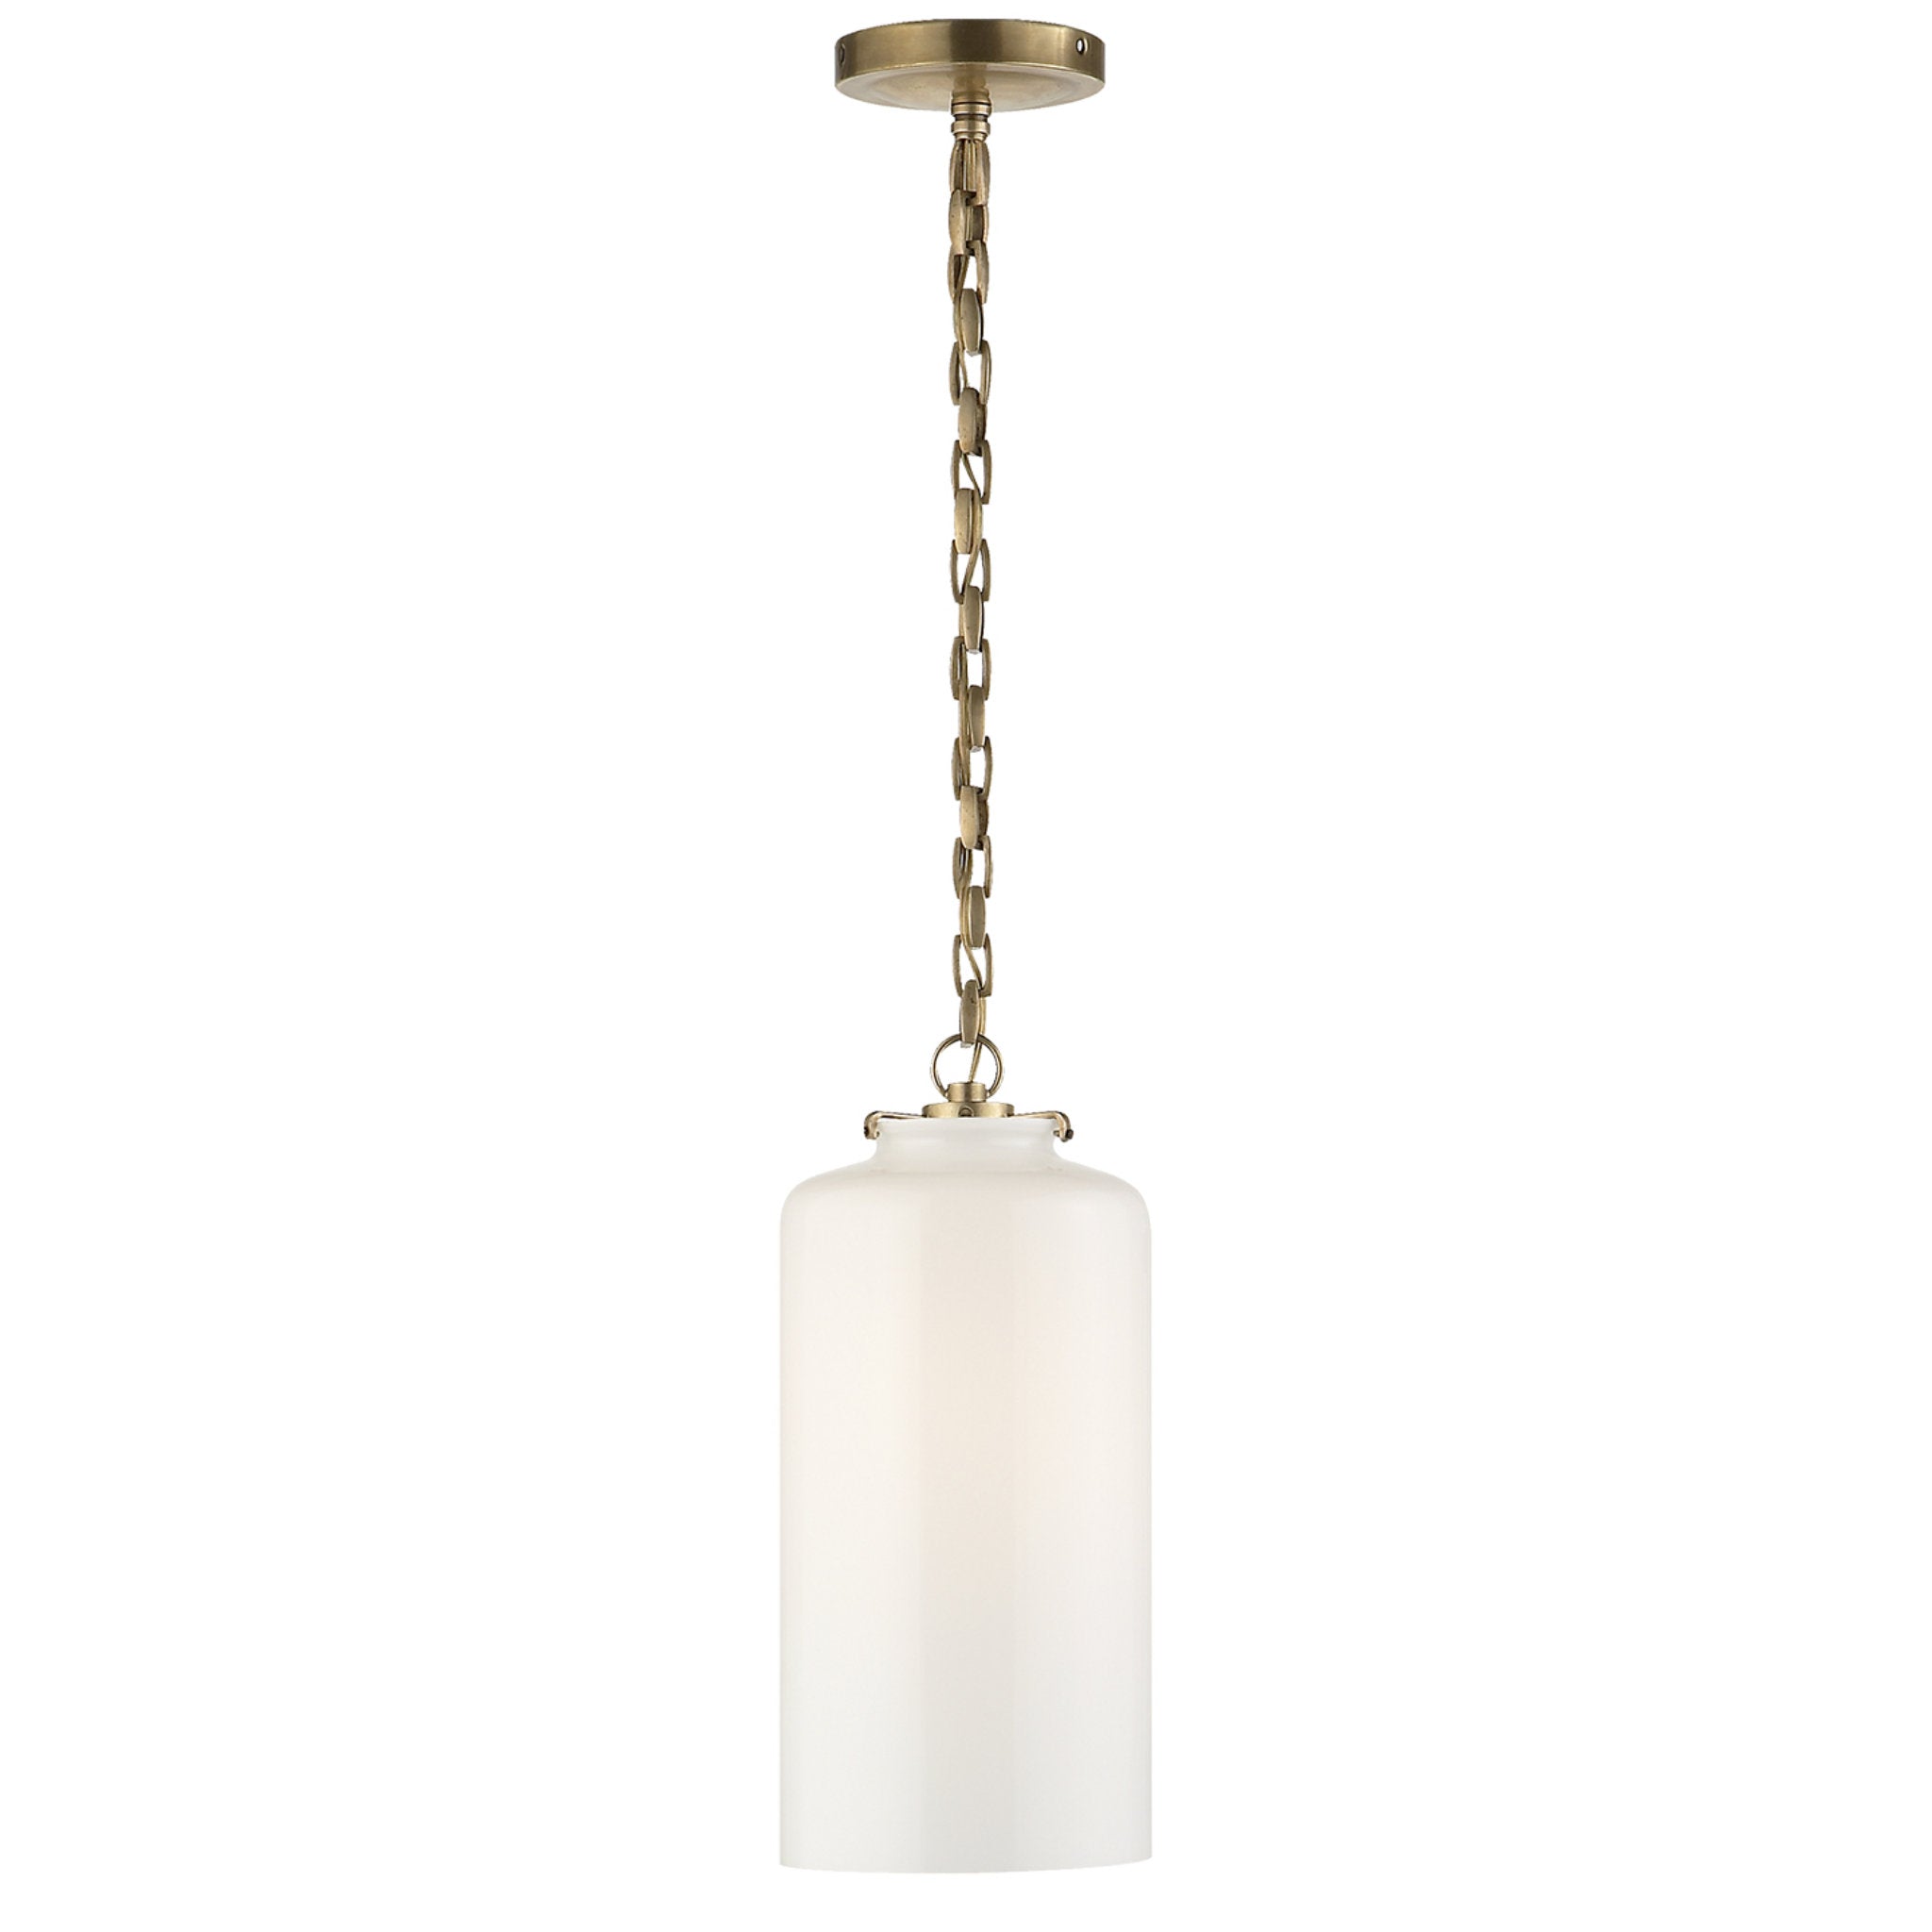 Thomas O'Brien Katie Cylinder Pendant in Hand-Rubbed Antique Brass with White Glass